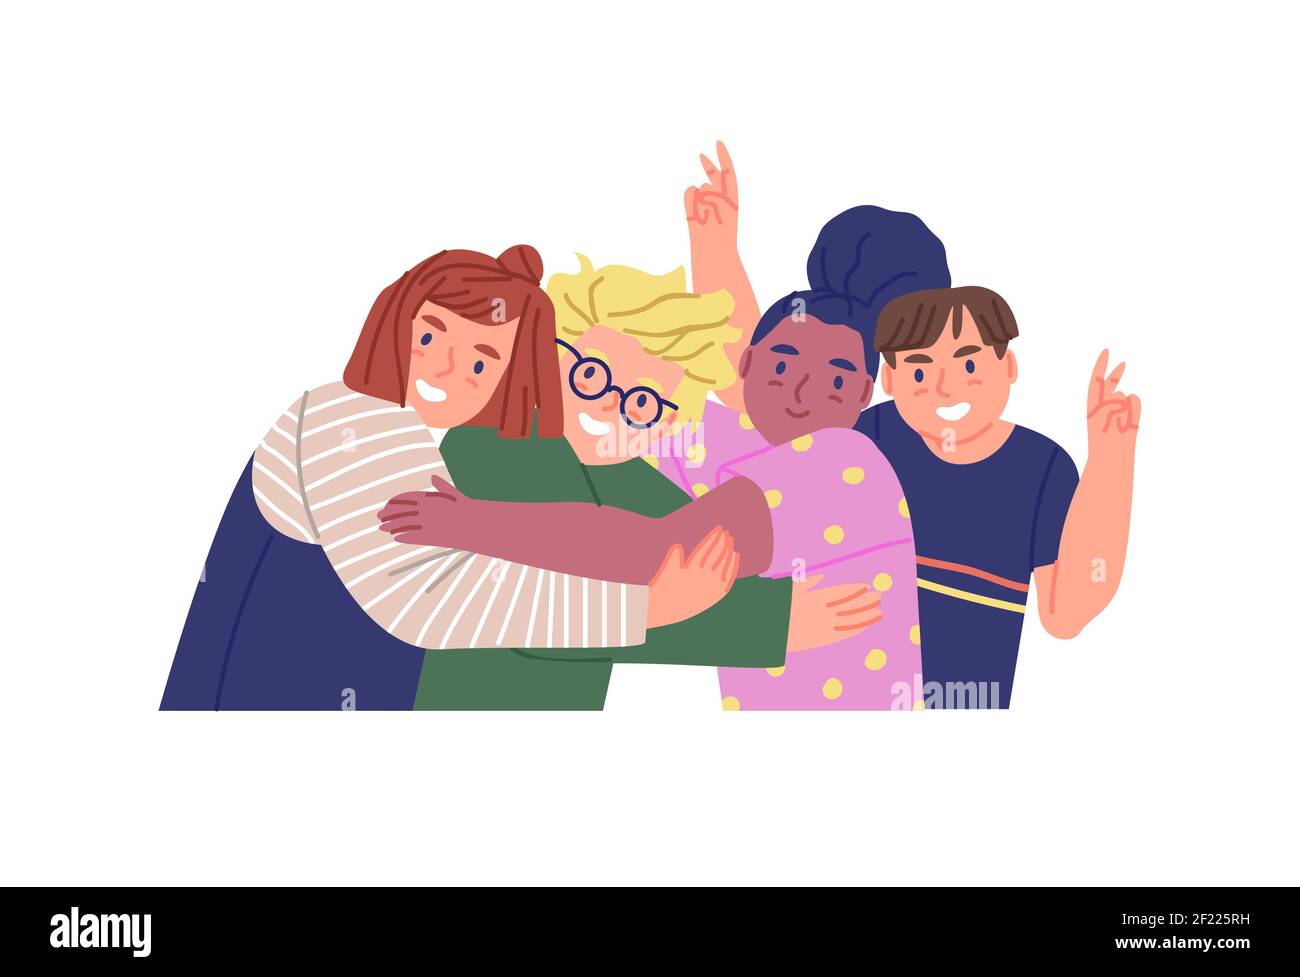 Cute children group hugging together on isolated background. Team of diverse happy kids in modern flat cartoon style. Young childhood friends, social Stock Vector